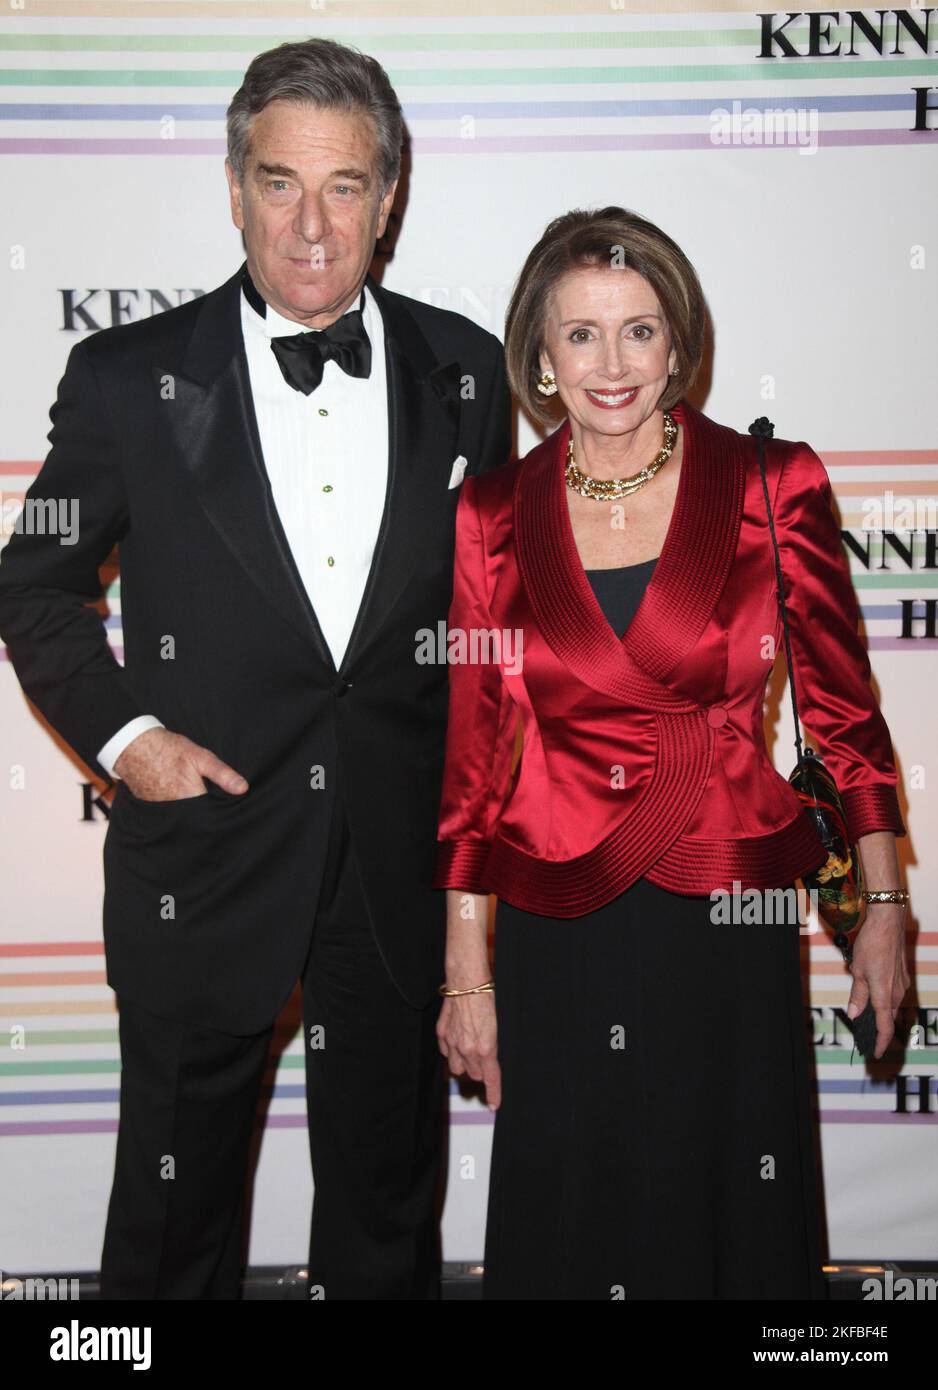 Nancy Pelosi & husband Paul arriving for the 2009 Kennedy Center Honors held at the  Kennedy Center in Washington, D.C.. December 6, 2009 Credit: Walter McBride/MediaPunch Stock Photo